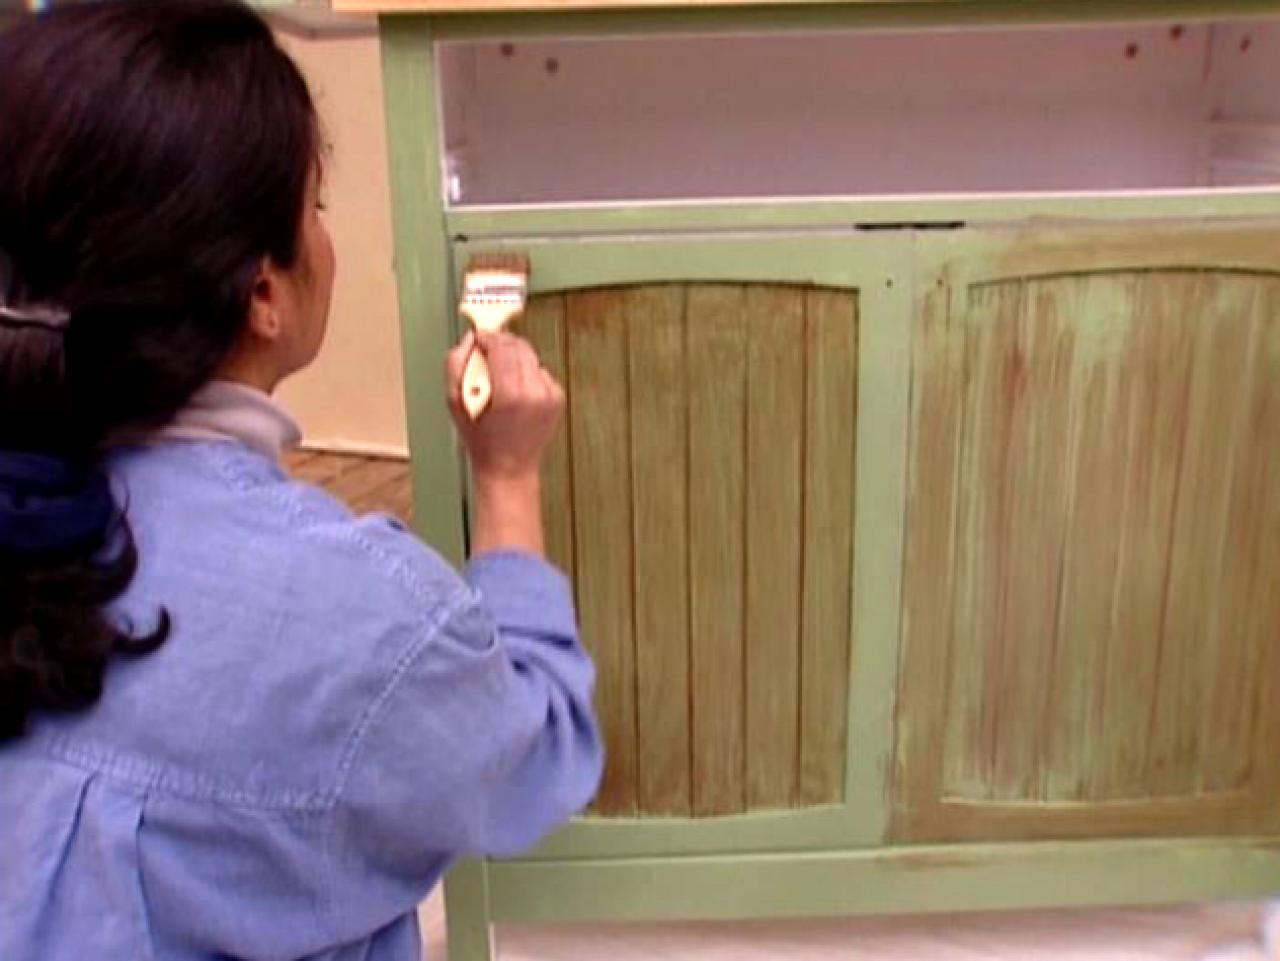 How To Antique A Cabinet Tos Diy, How To Paint Rustic Kitchen Cabinets